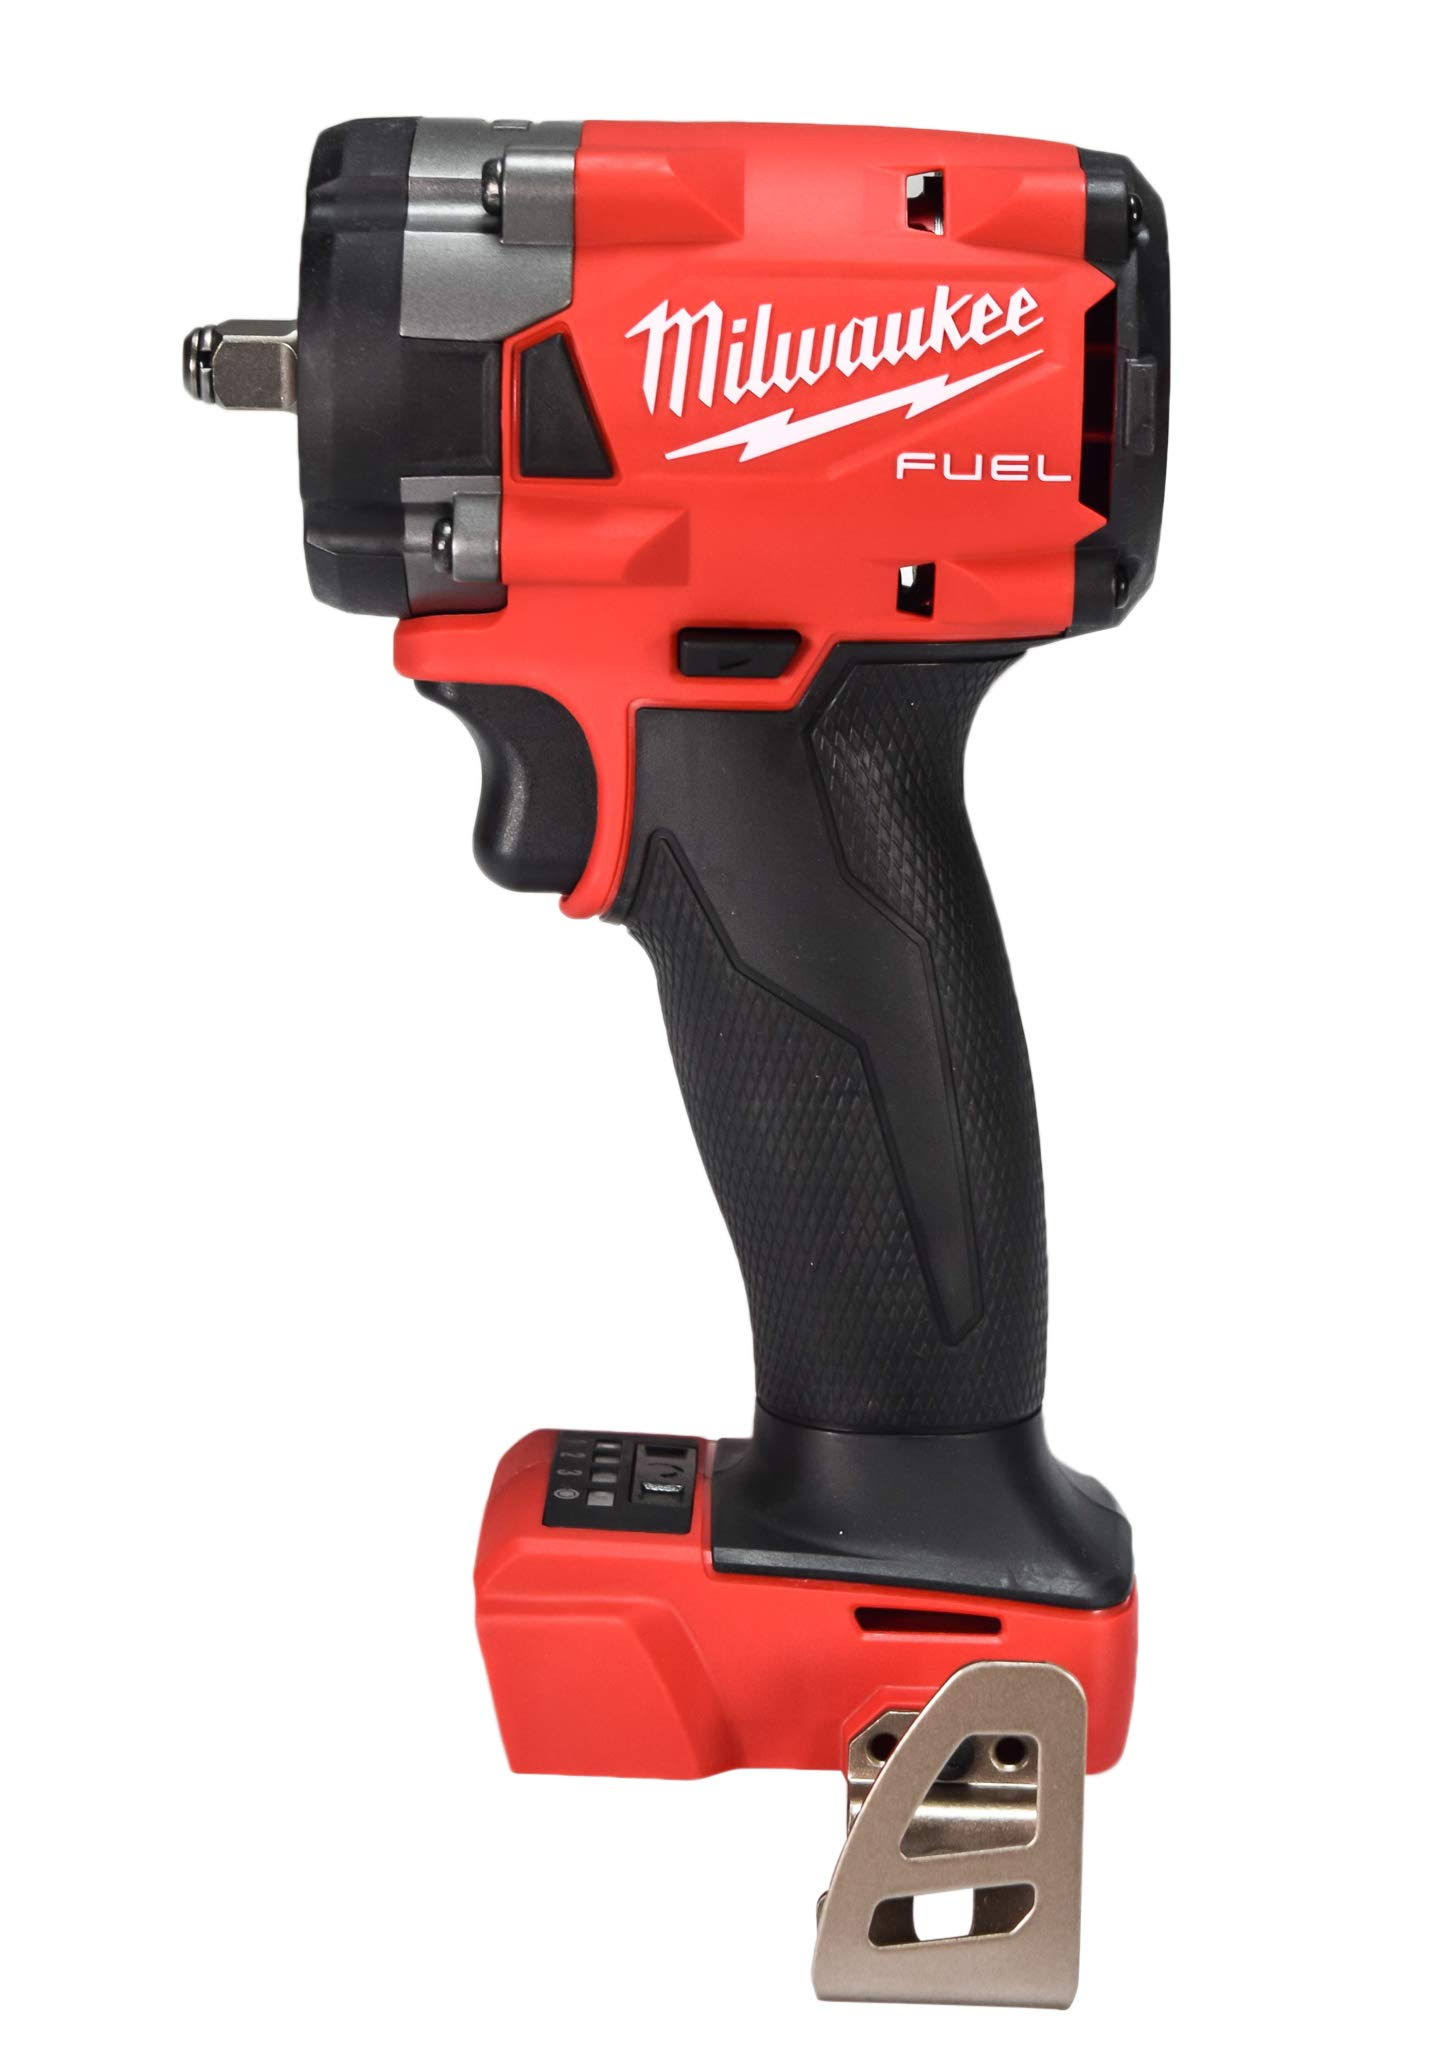 Milwaukee 2854-20 M18 18V Fuel 3/8" Compact Impact Wrench w/ Friction Ring